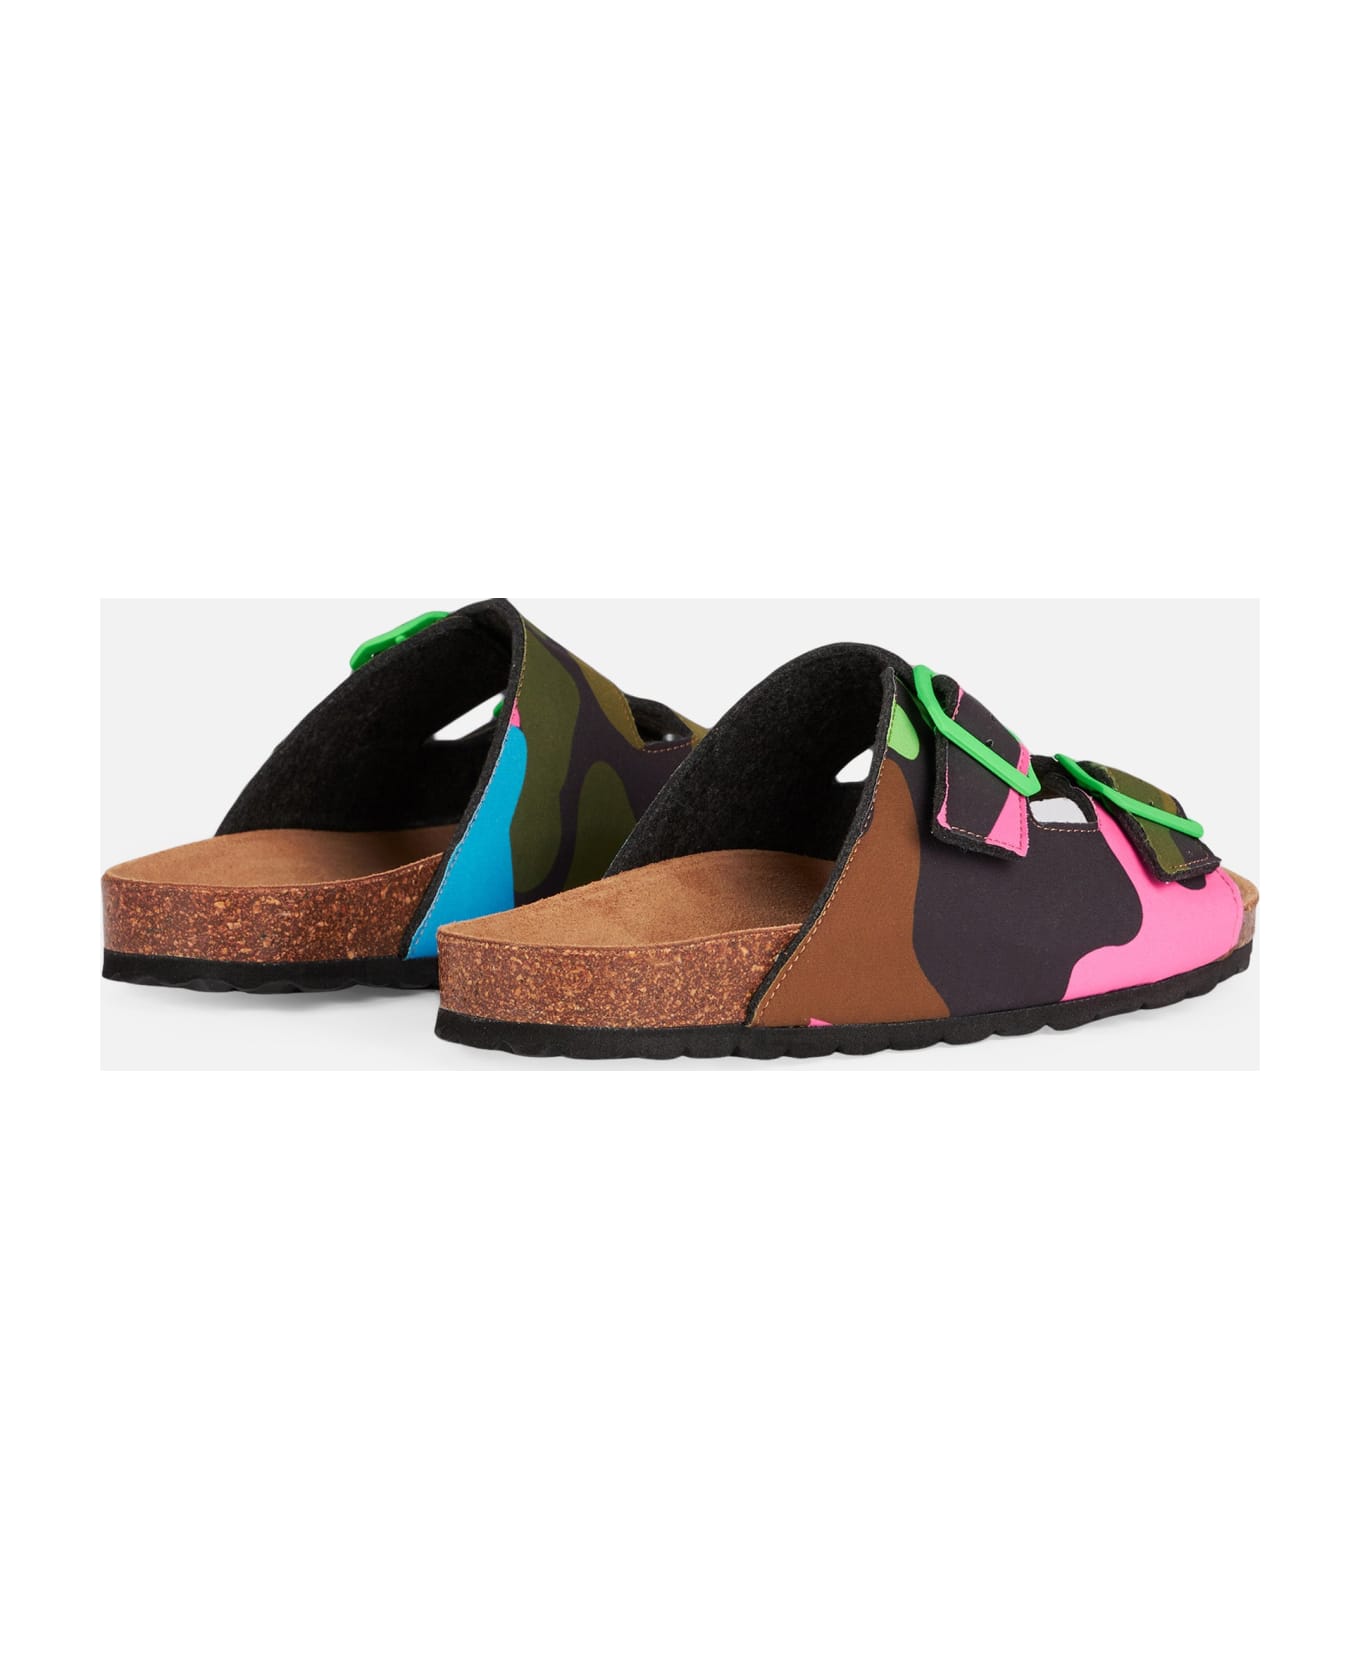 MC2 Saint Barth Sandals With Multicolor Fluo Camouflage Print - FLUO